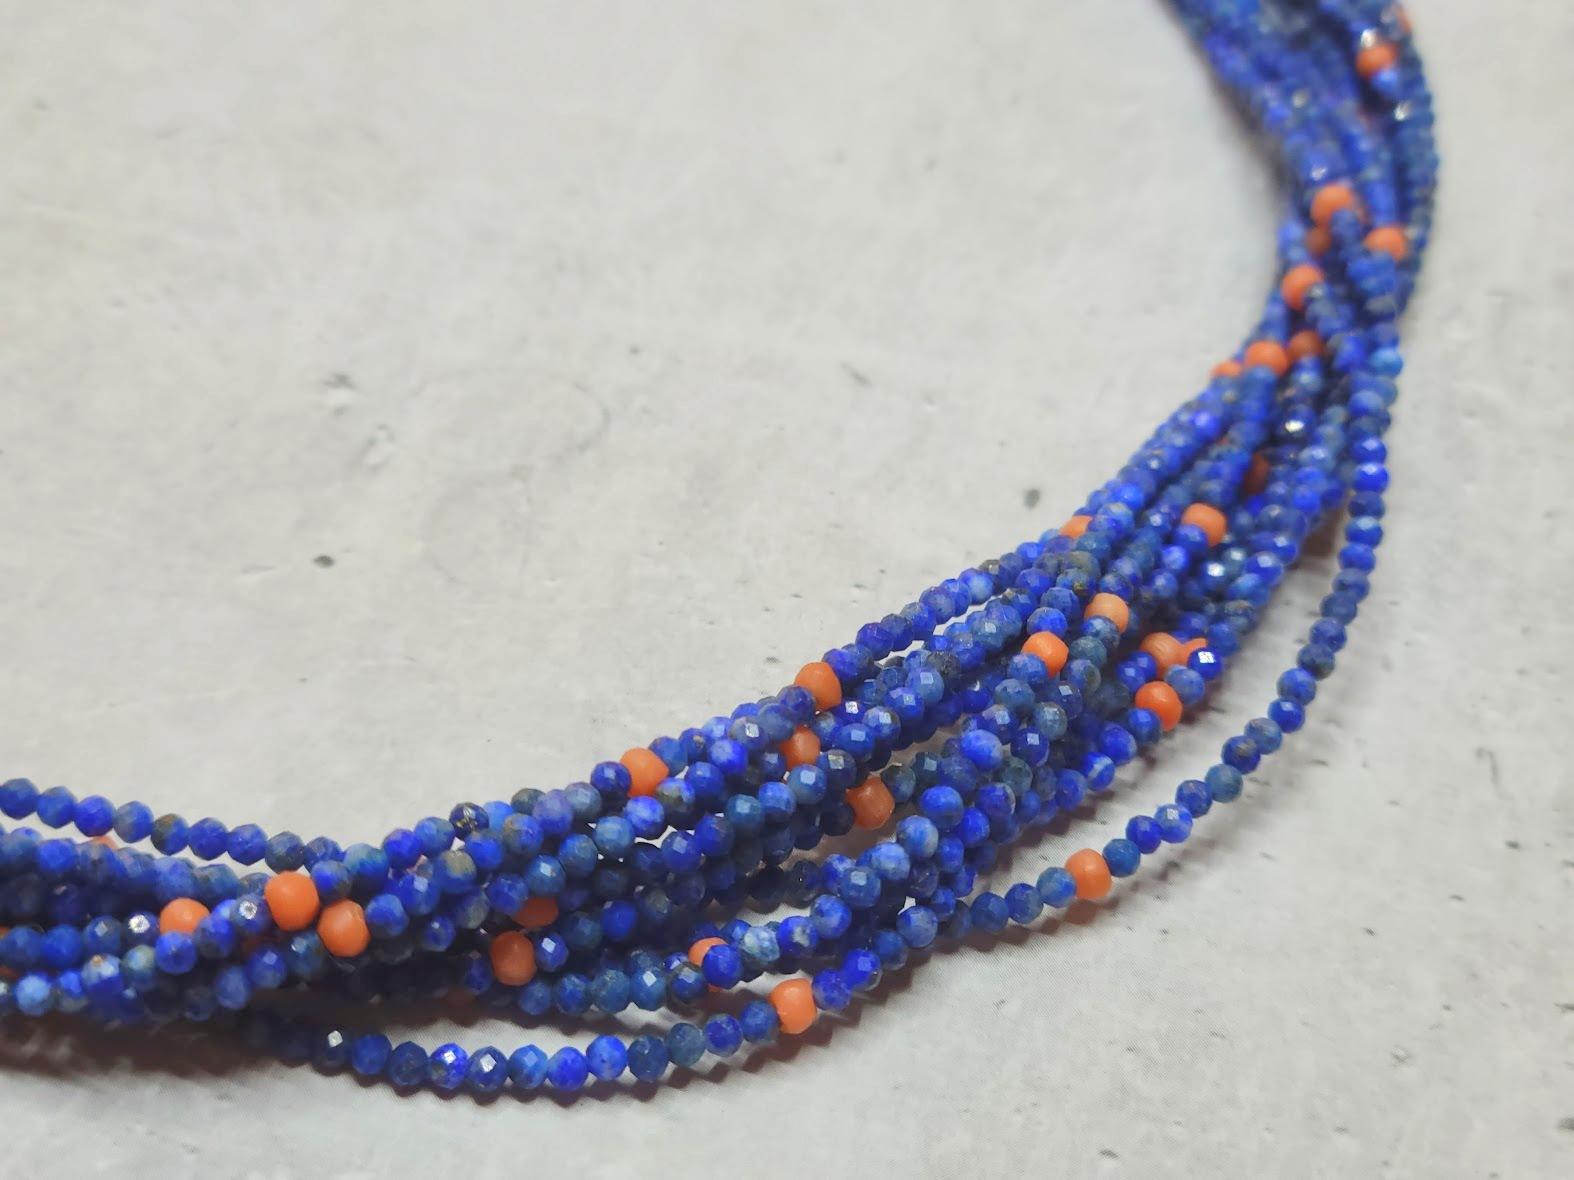 Introducing a stunning 12-strand beaded necklace made of vintage natural Afghan lapis lazuli and vintage natural Mediterranean Italian coral. The faceted lapis lazuli beads boast an overflow of blue hues, while the old Italian coral beads add a